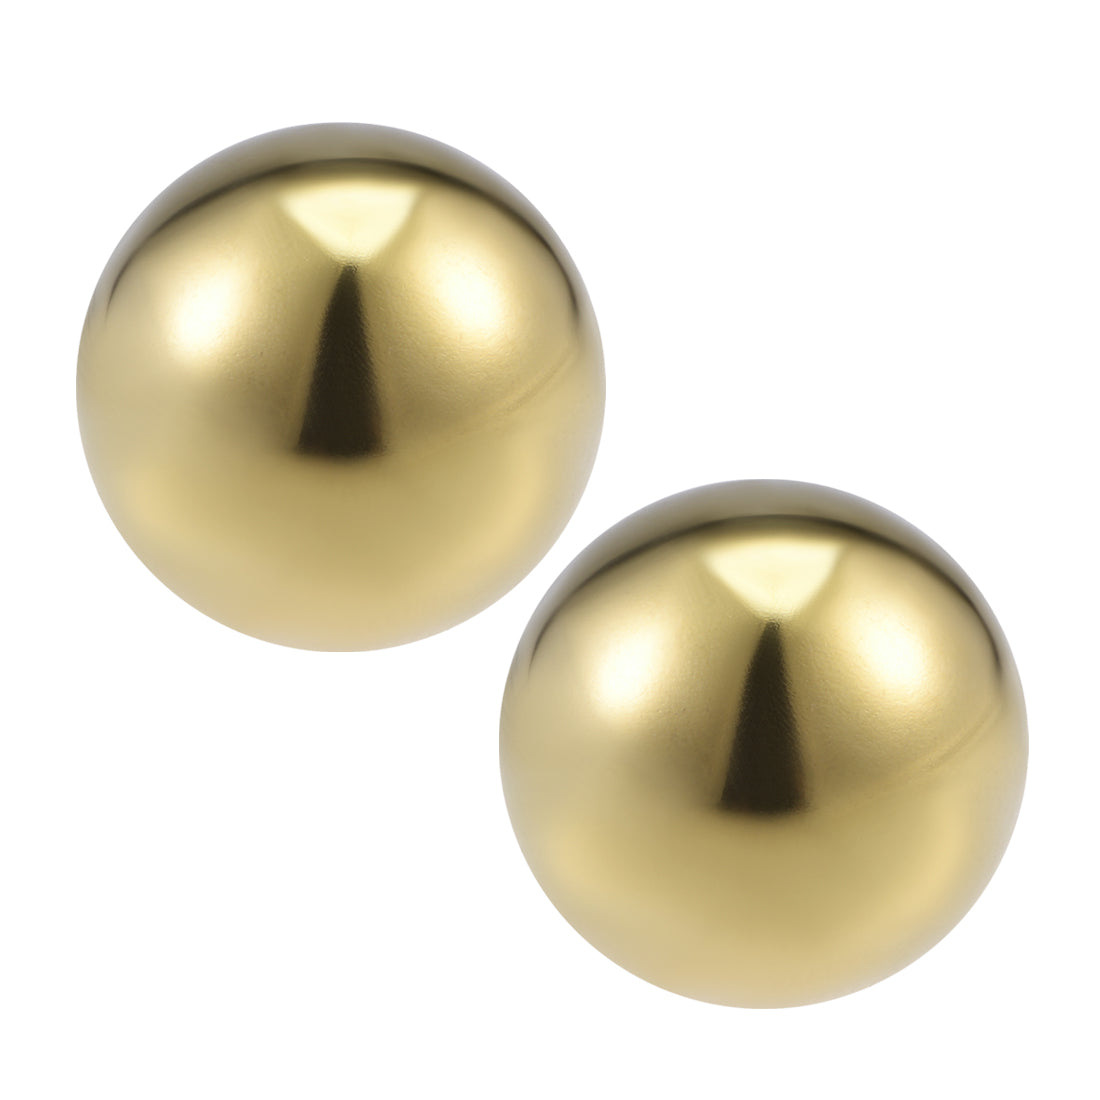 uxcell Uxcell 25mm 201 Stainless Steel Hollow Ball for Home Garden Decorations Gold Tone 2pcs